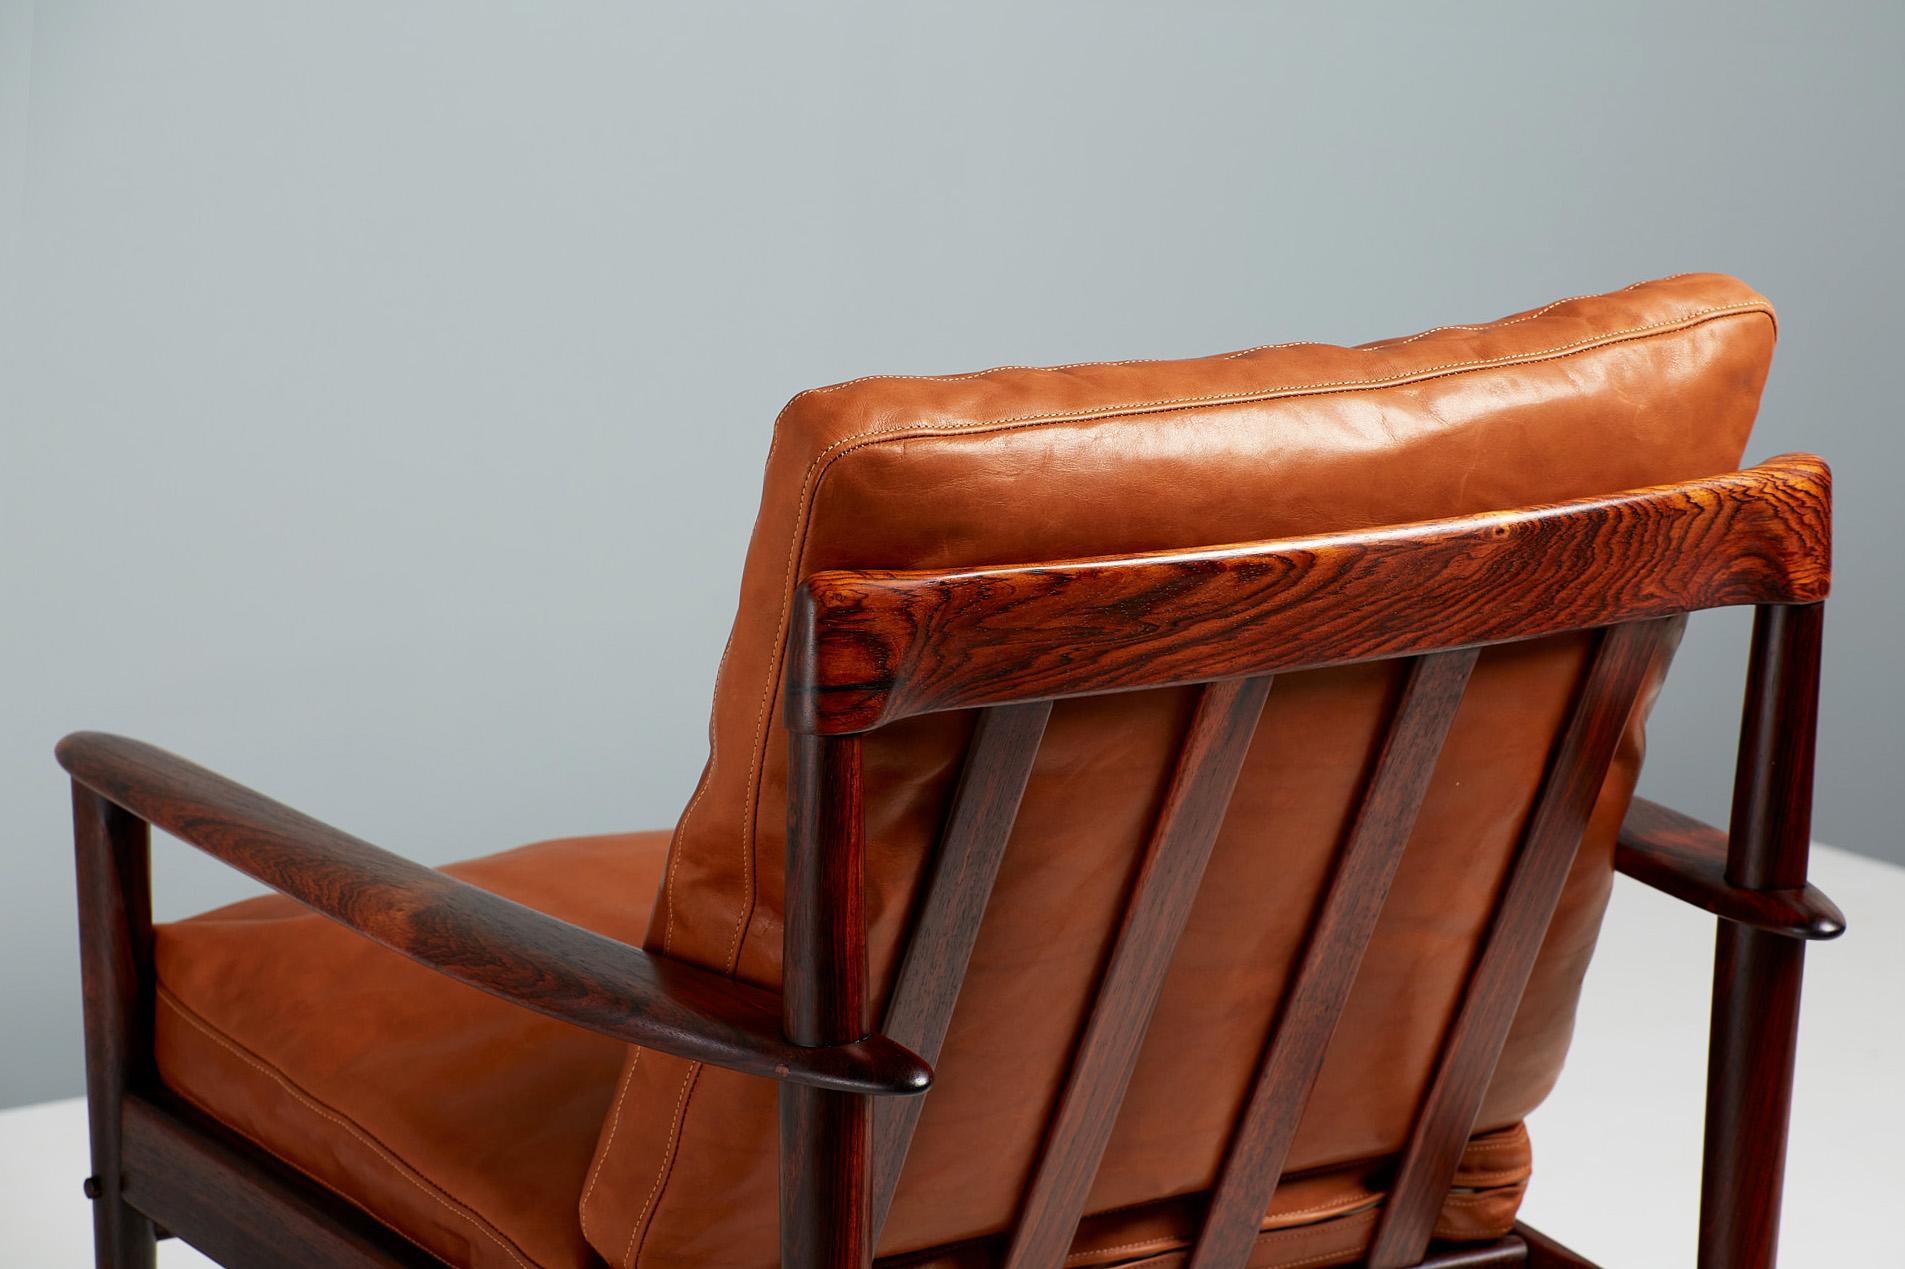 Leather Grete Jalk PJ-56 Rosewood Lounge, Chair 1950s